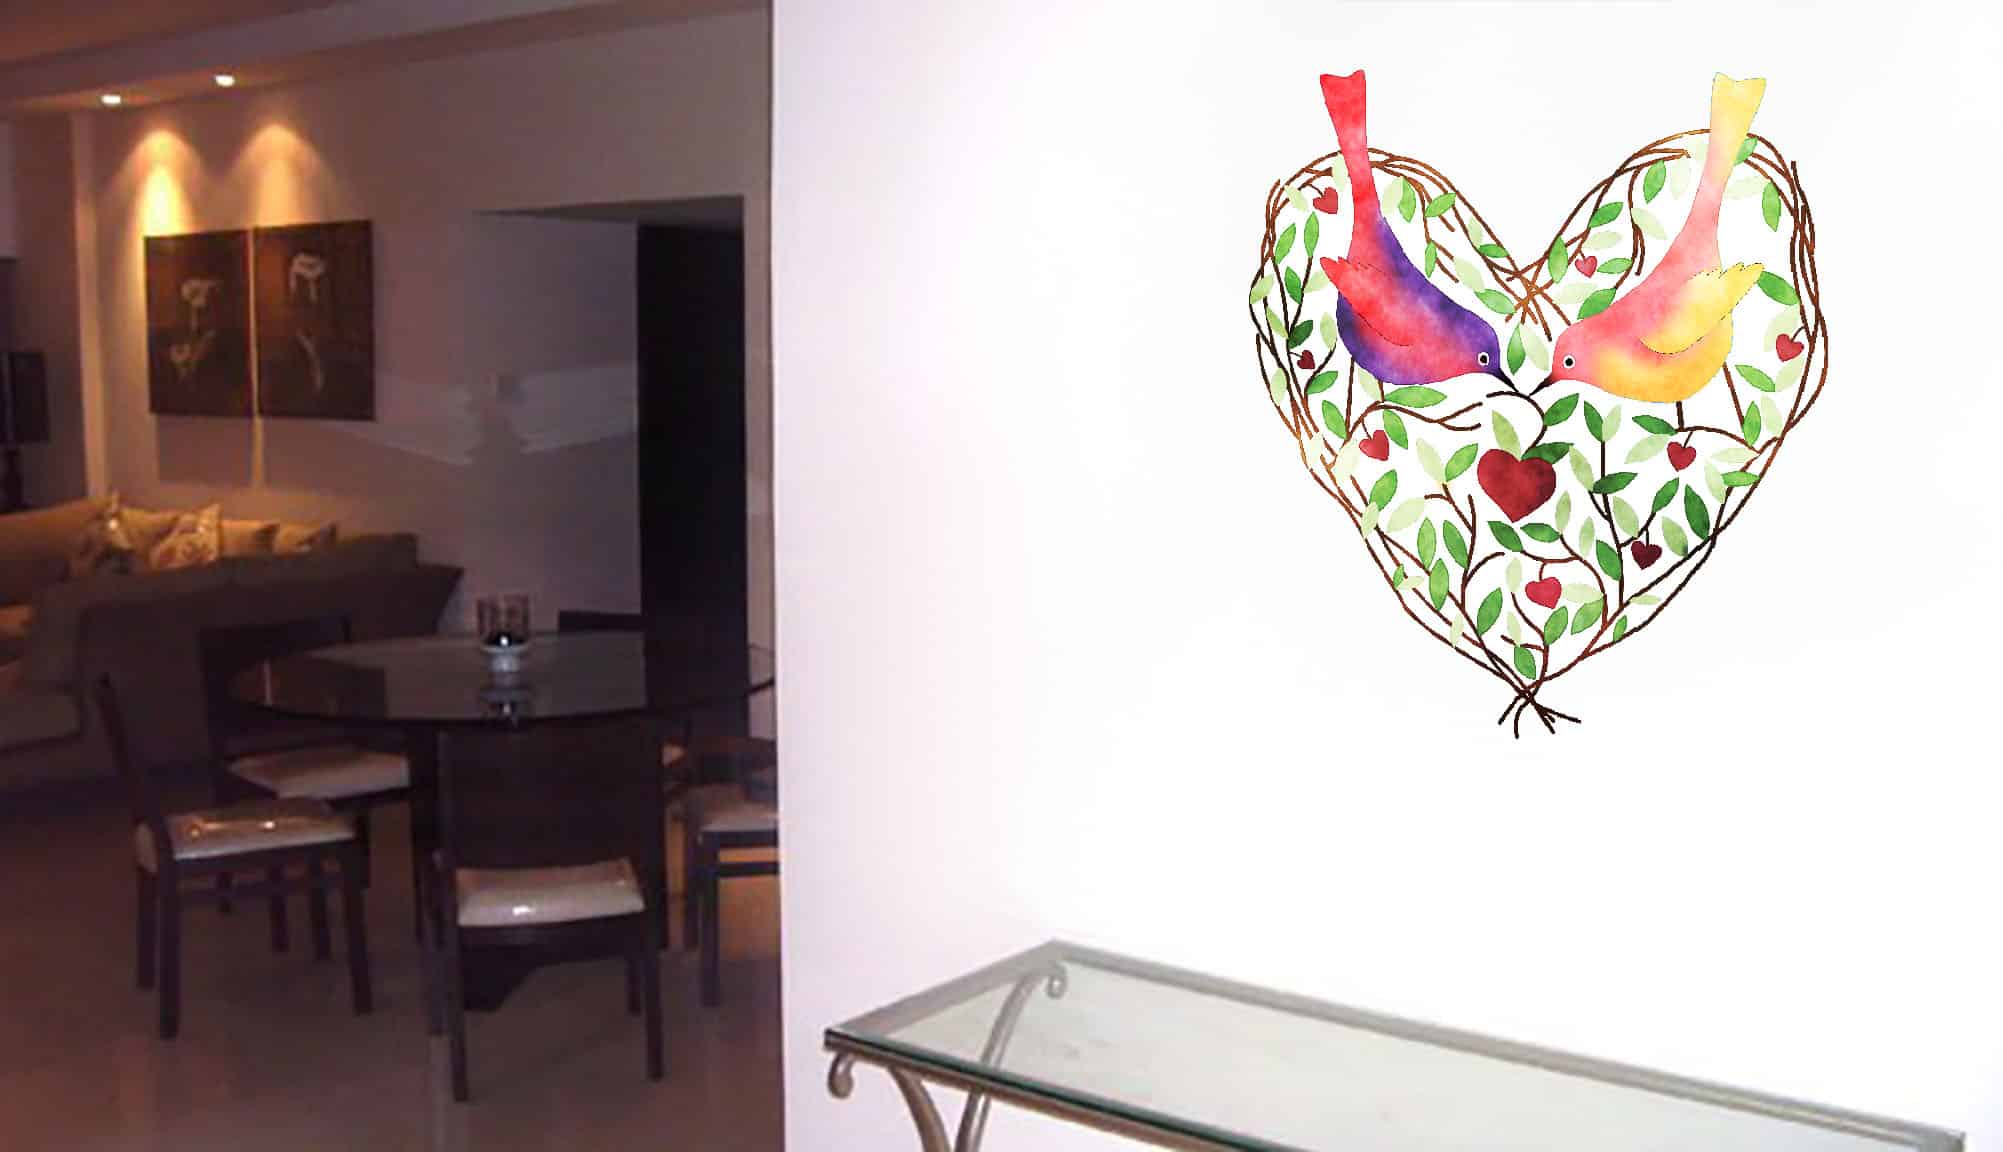 45 Wall Sticker Ideas To Open Up Your Soul Through The Windows Of Love